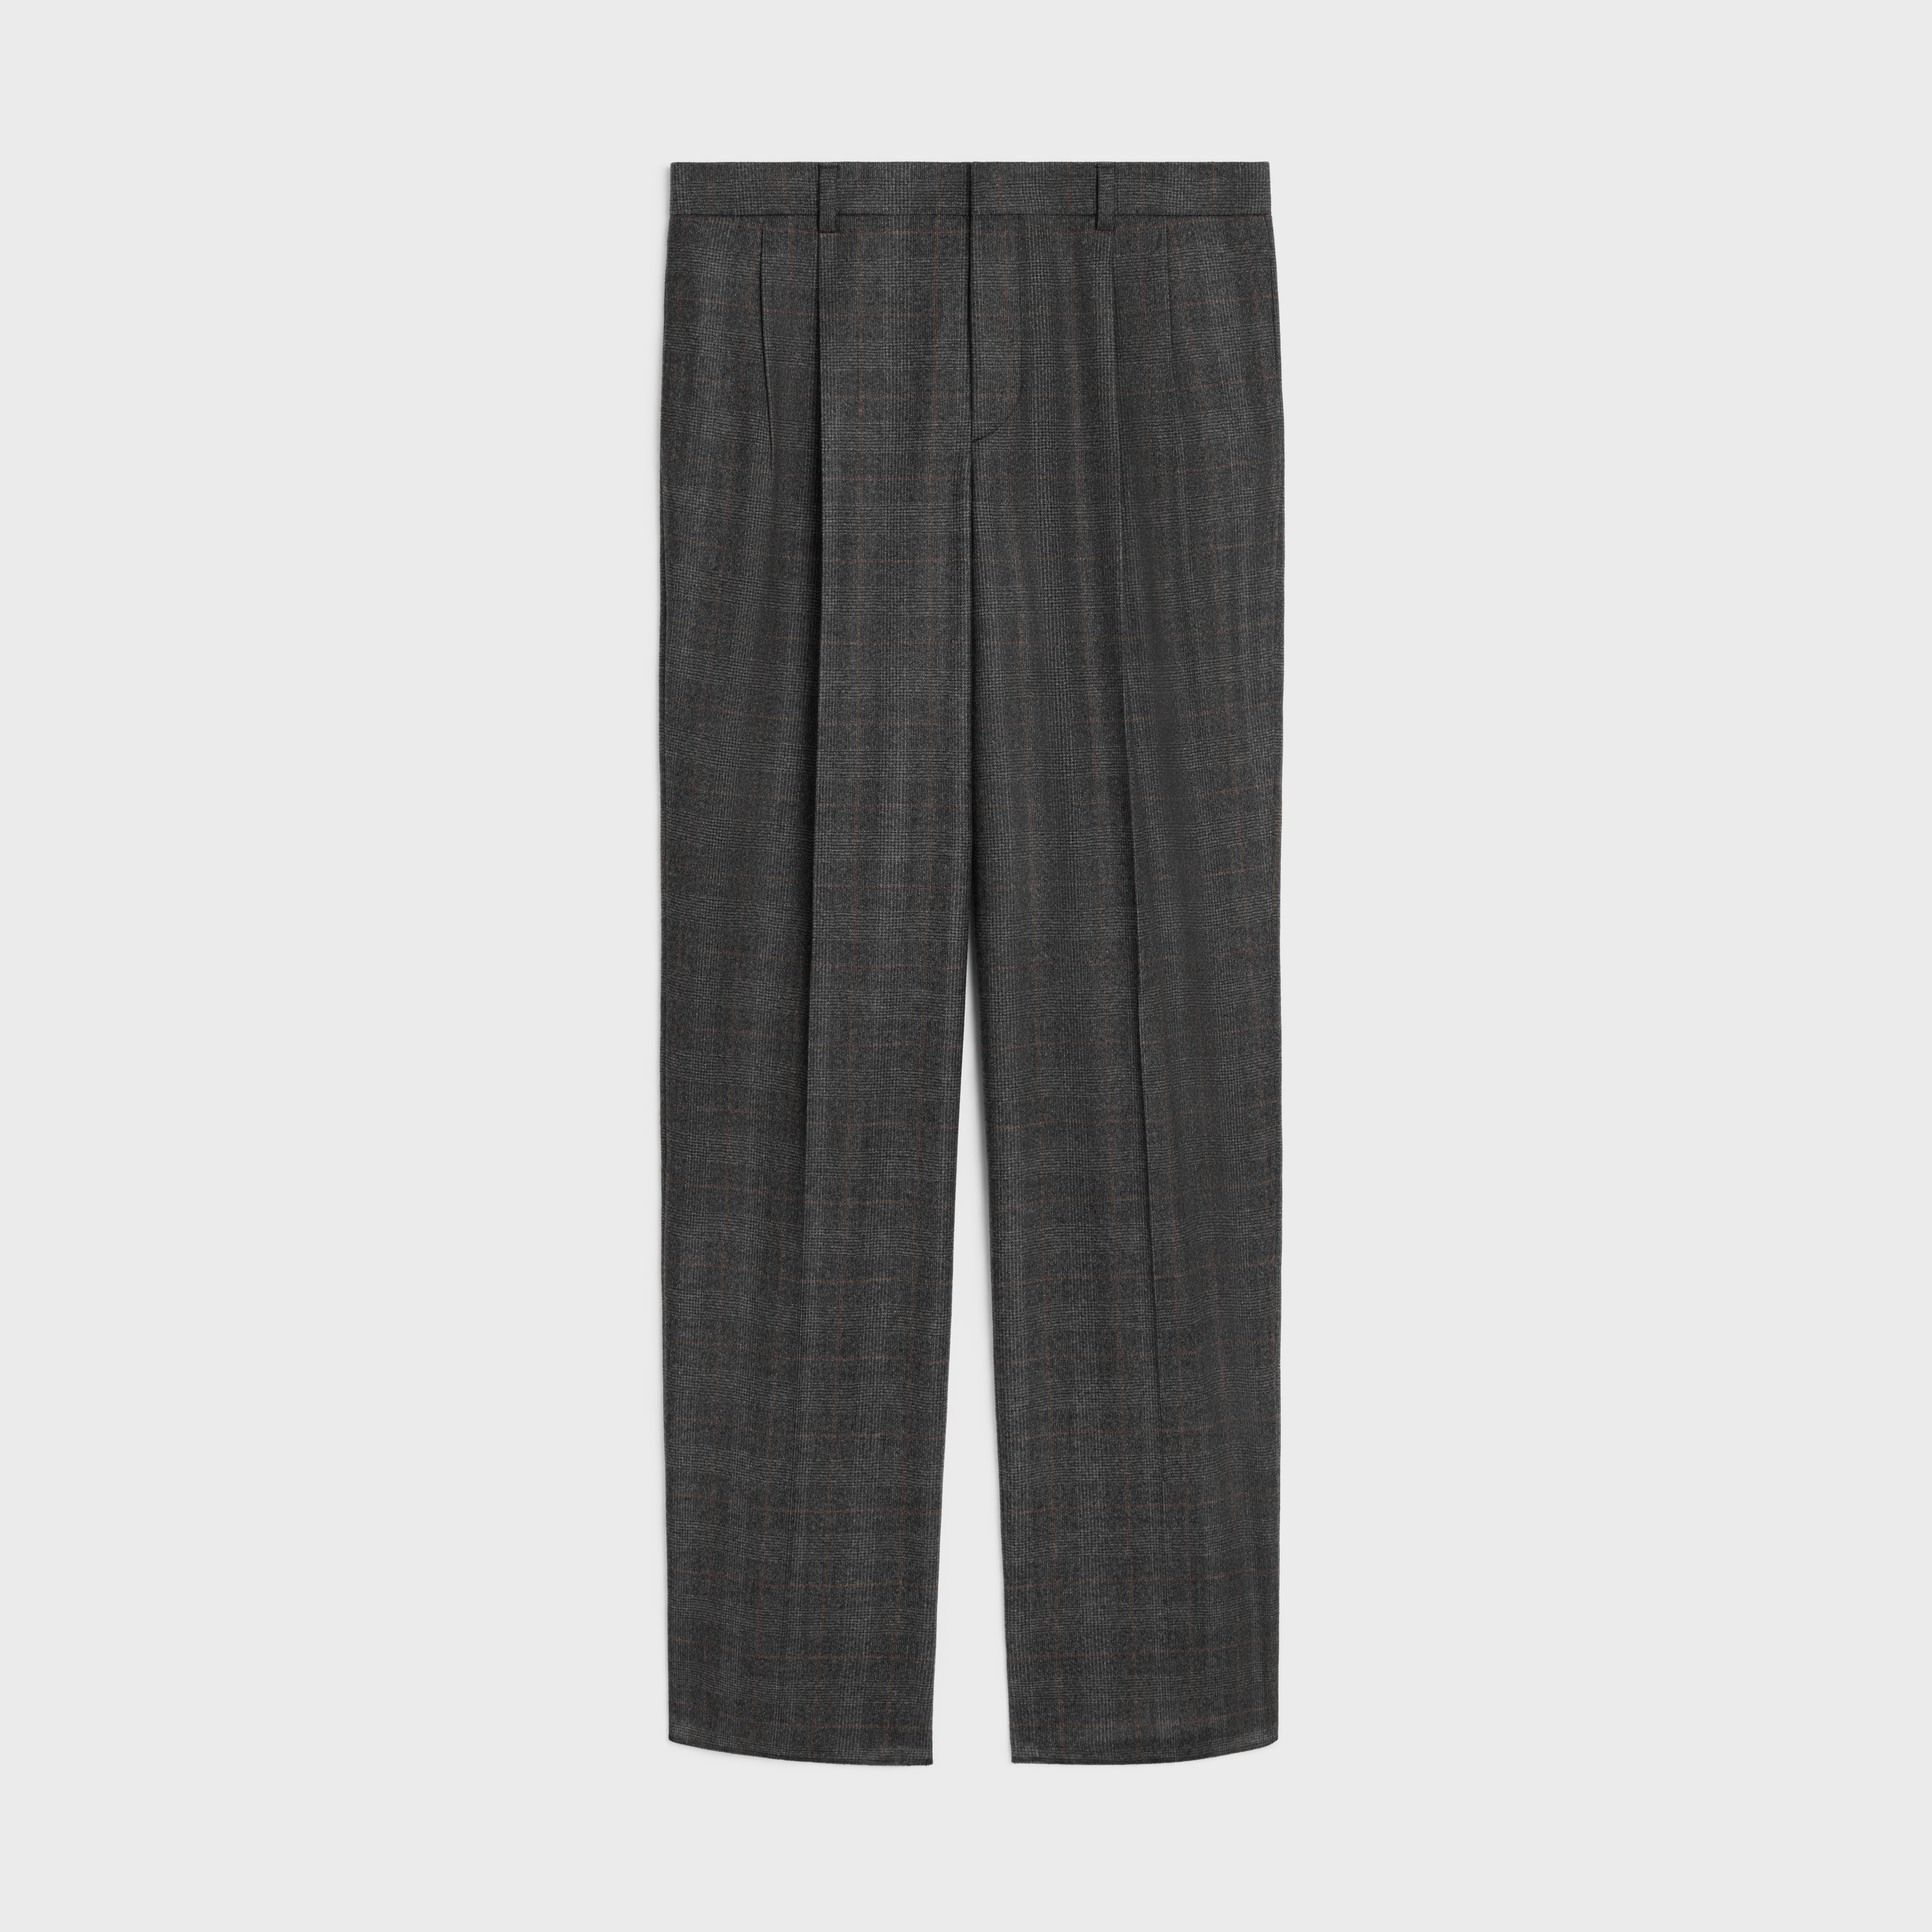 jude pants in prince of wales flannel - 1